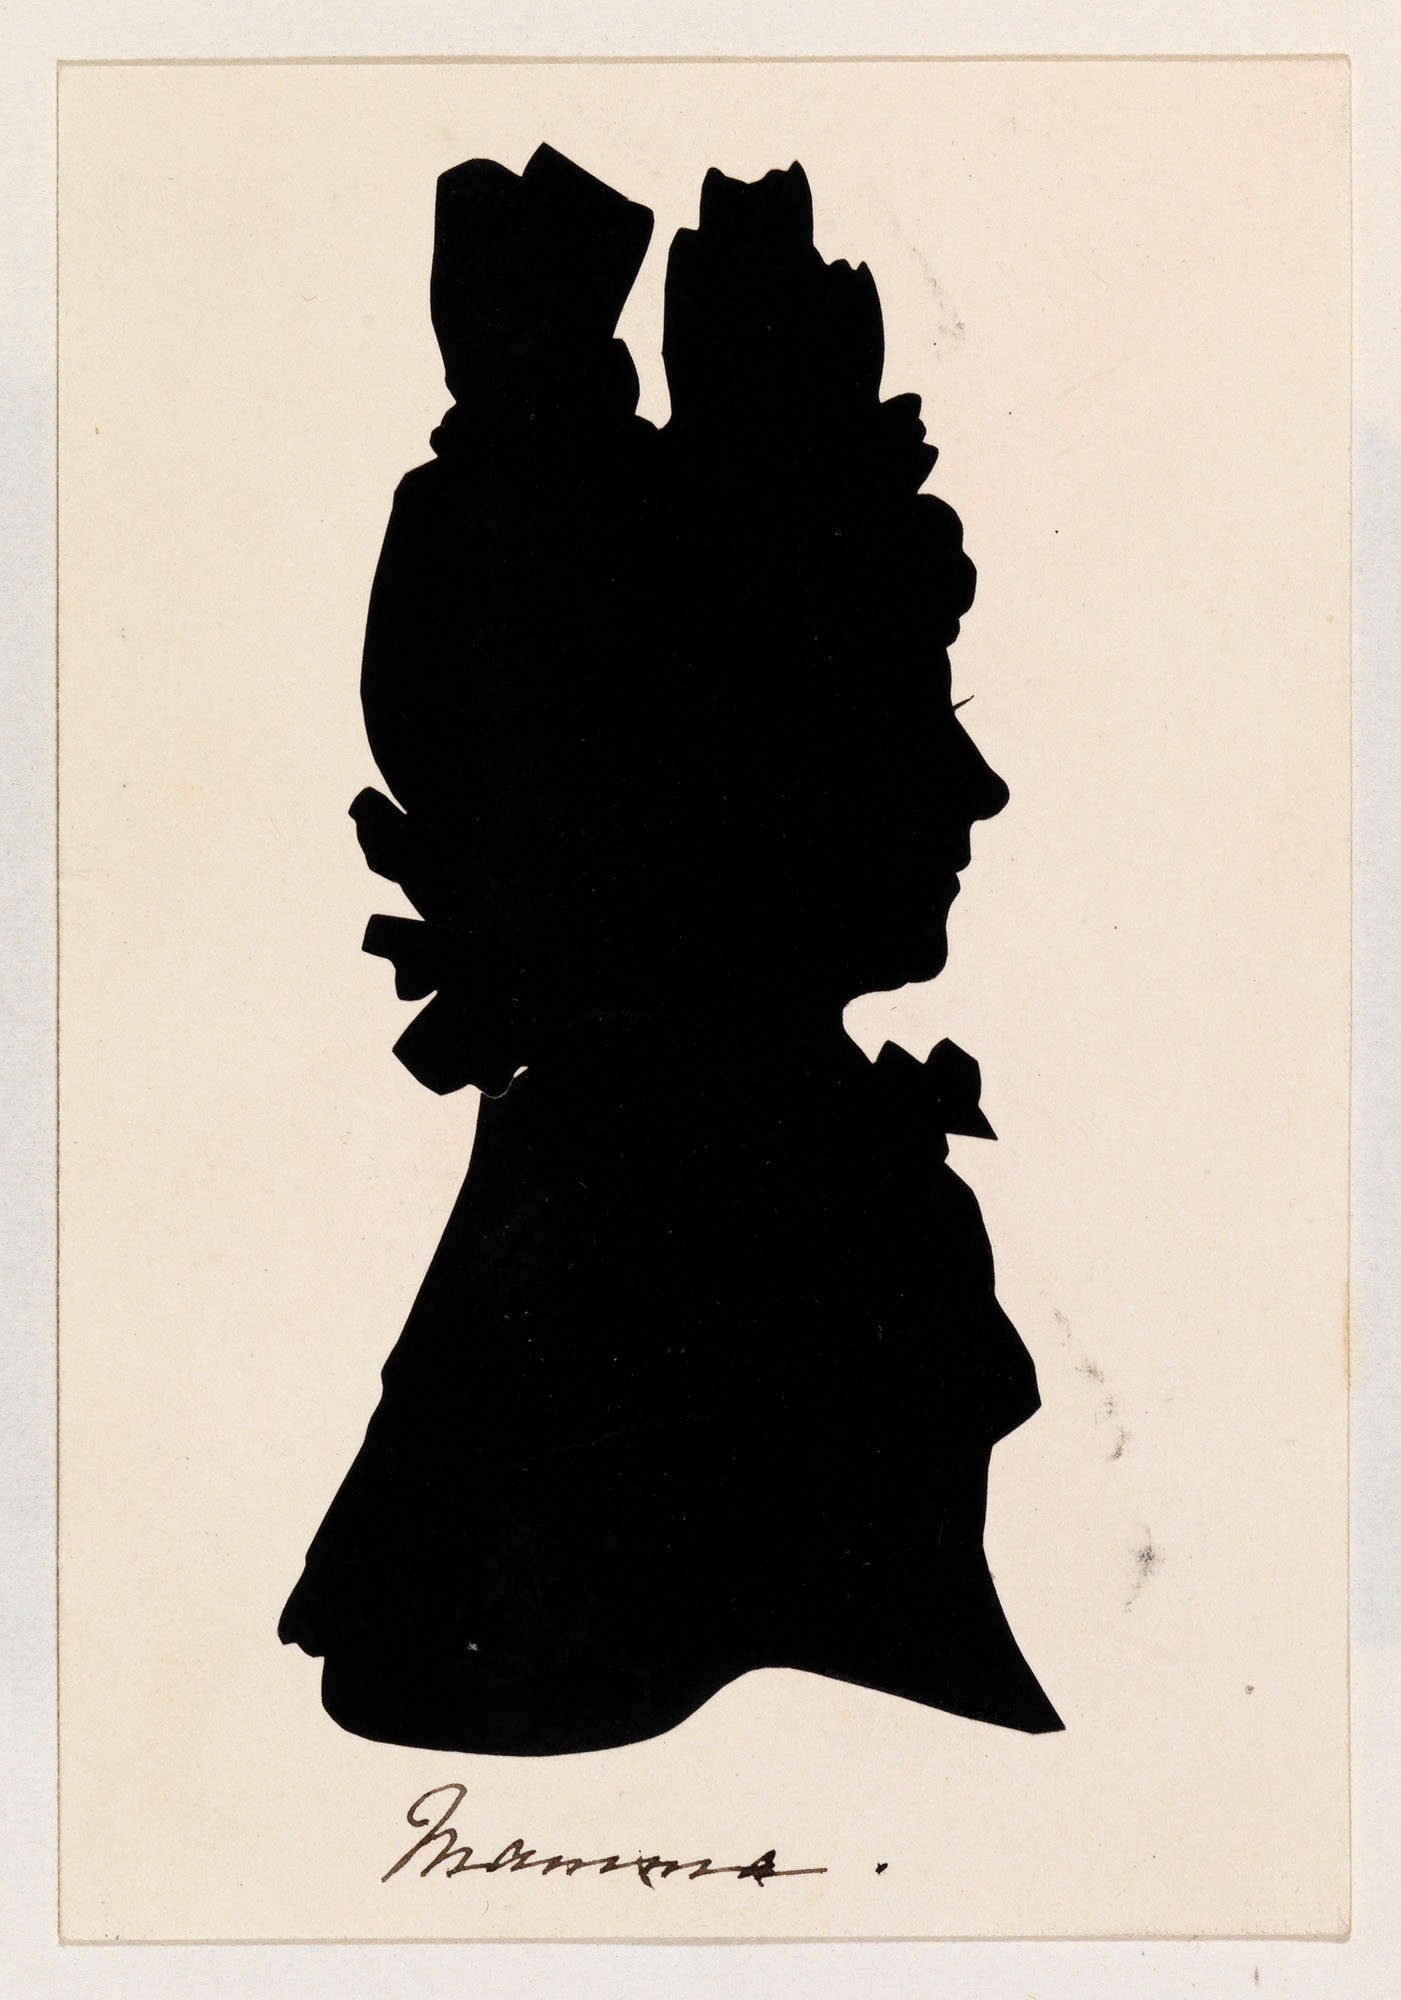 A silhouette showing a portrait of Princess Victoria's mother, the Duchess of Kent. She is shown bust-length and facing right in profile. She is wearing an elaborate headdress and a high frilled collar. Inscribed below: Mamma.